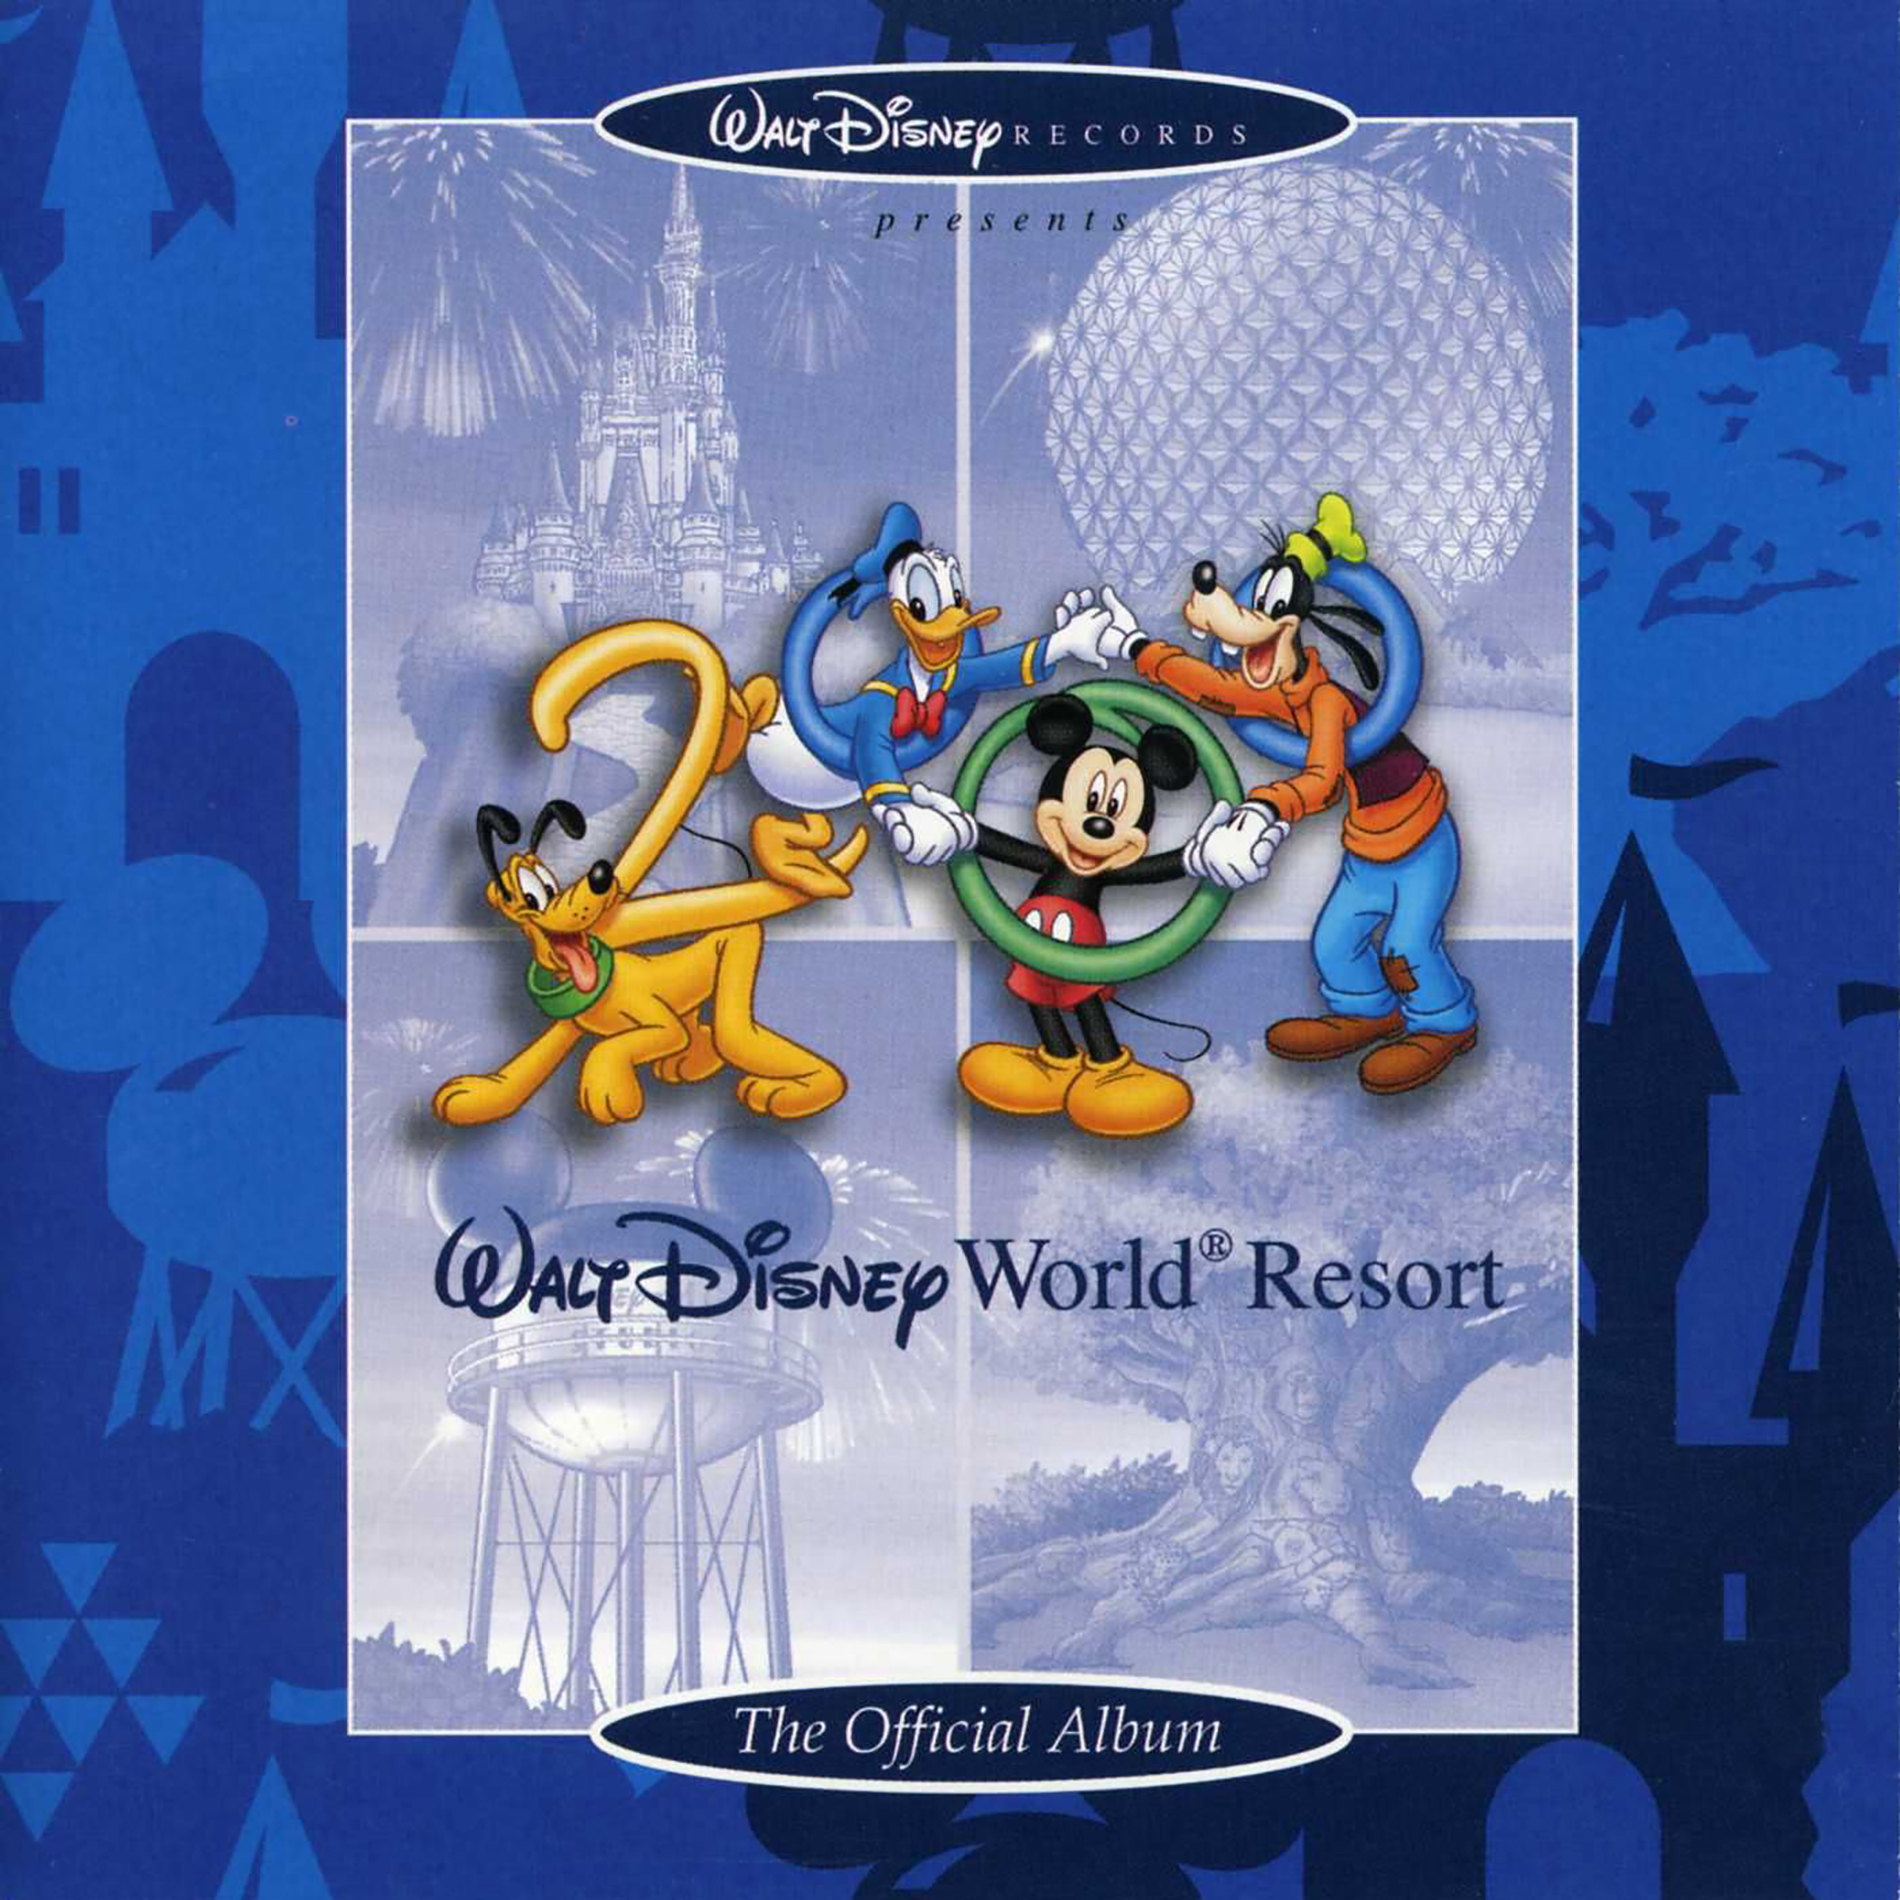 Release “Walt Disney World Resort: The Official Album” by Various